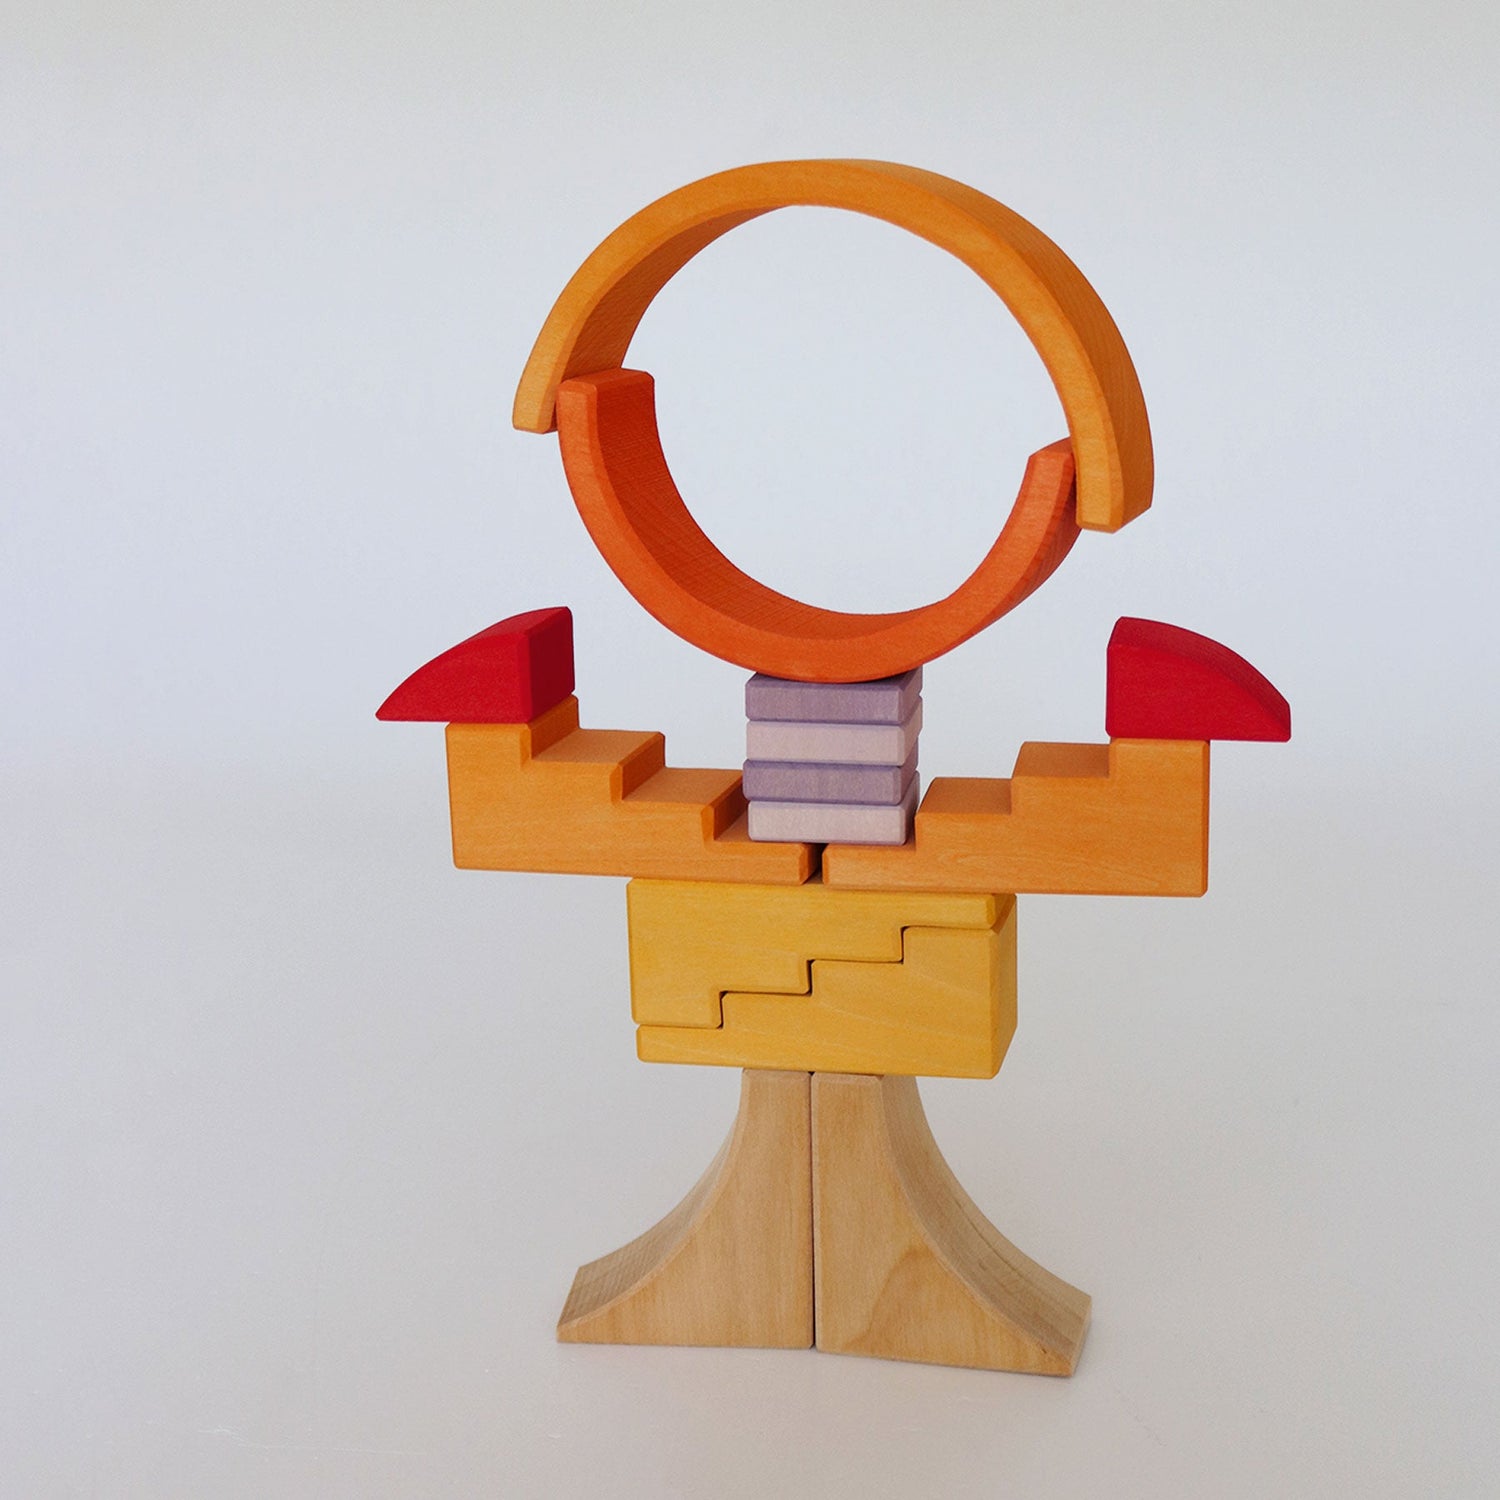 GRIMM'S | BUILDING WORLD DESERT SAND by GRIMM'S WOODEN TOYS - The Playful Collective